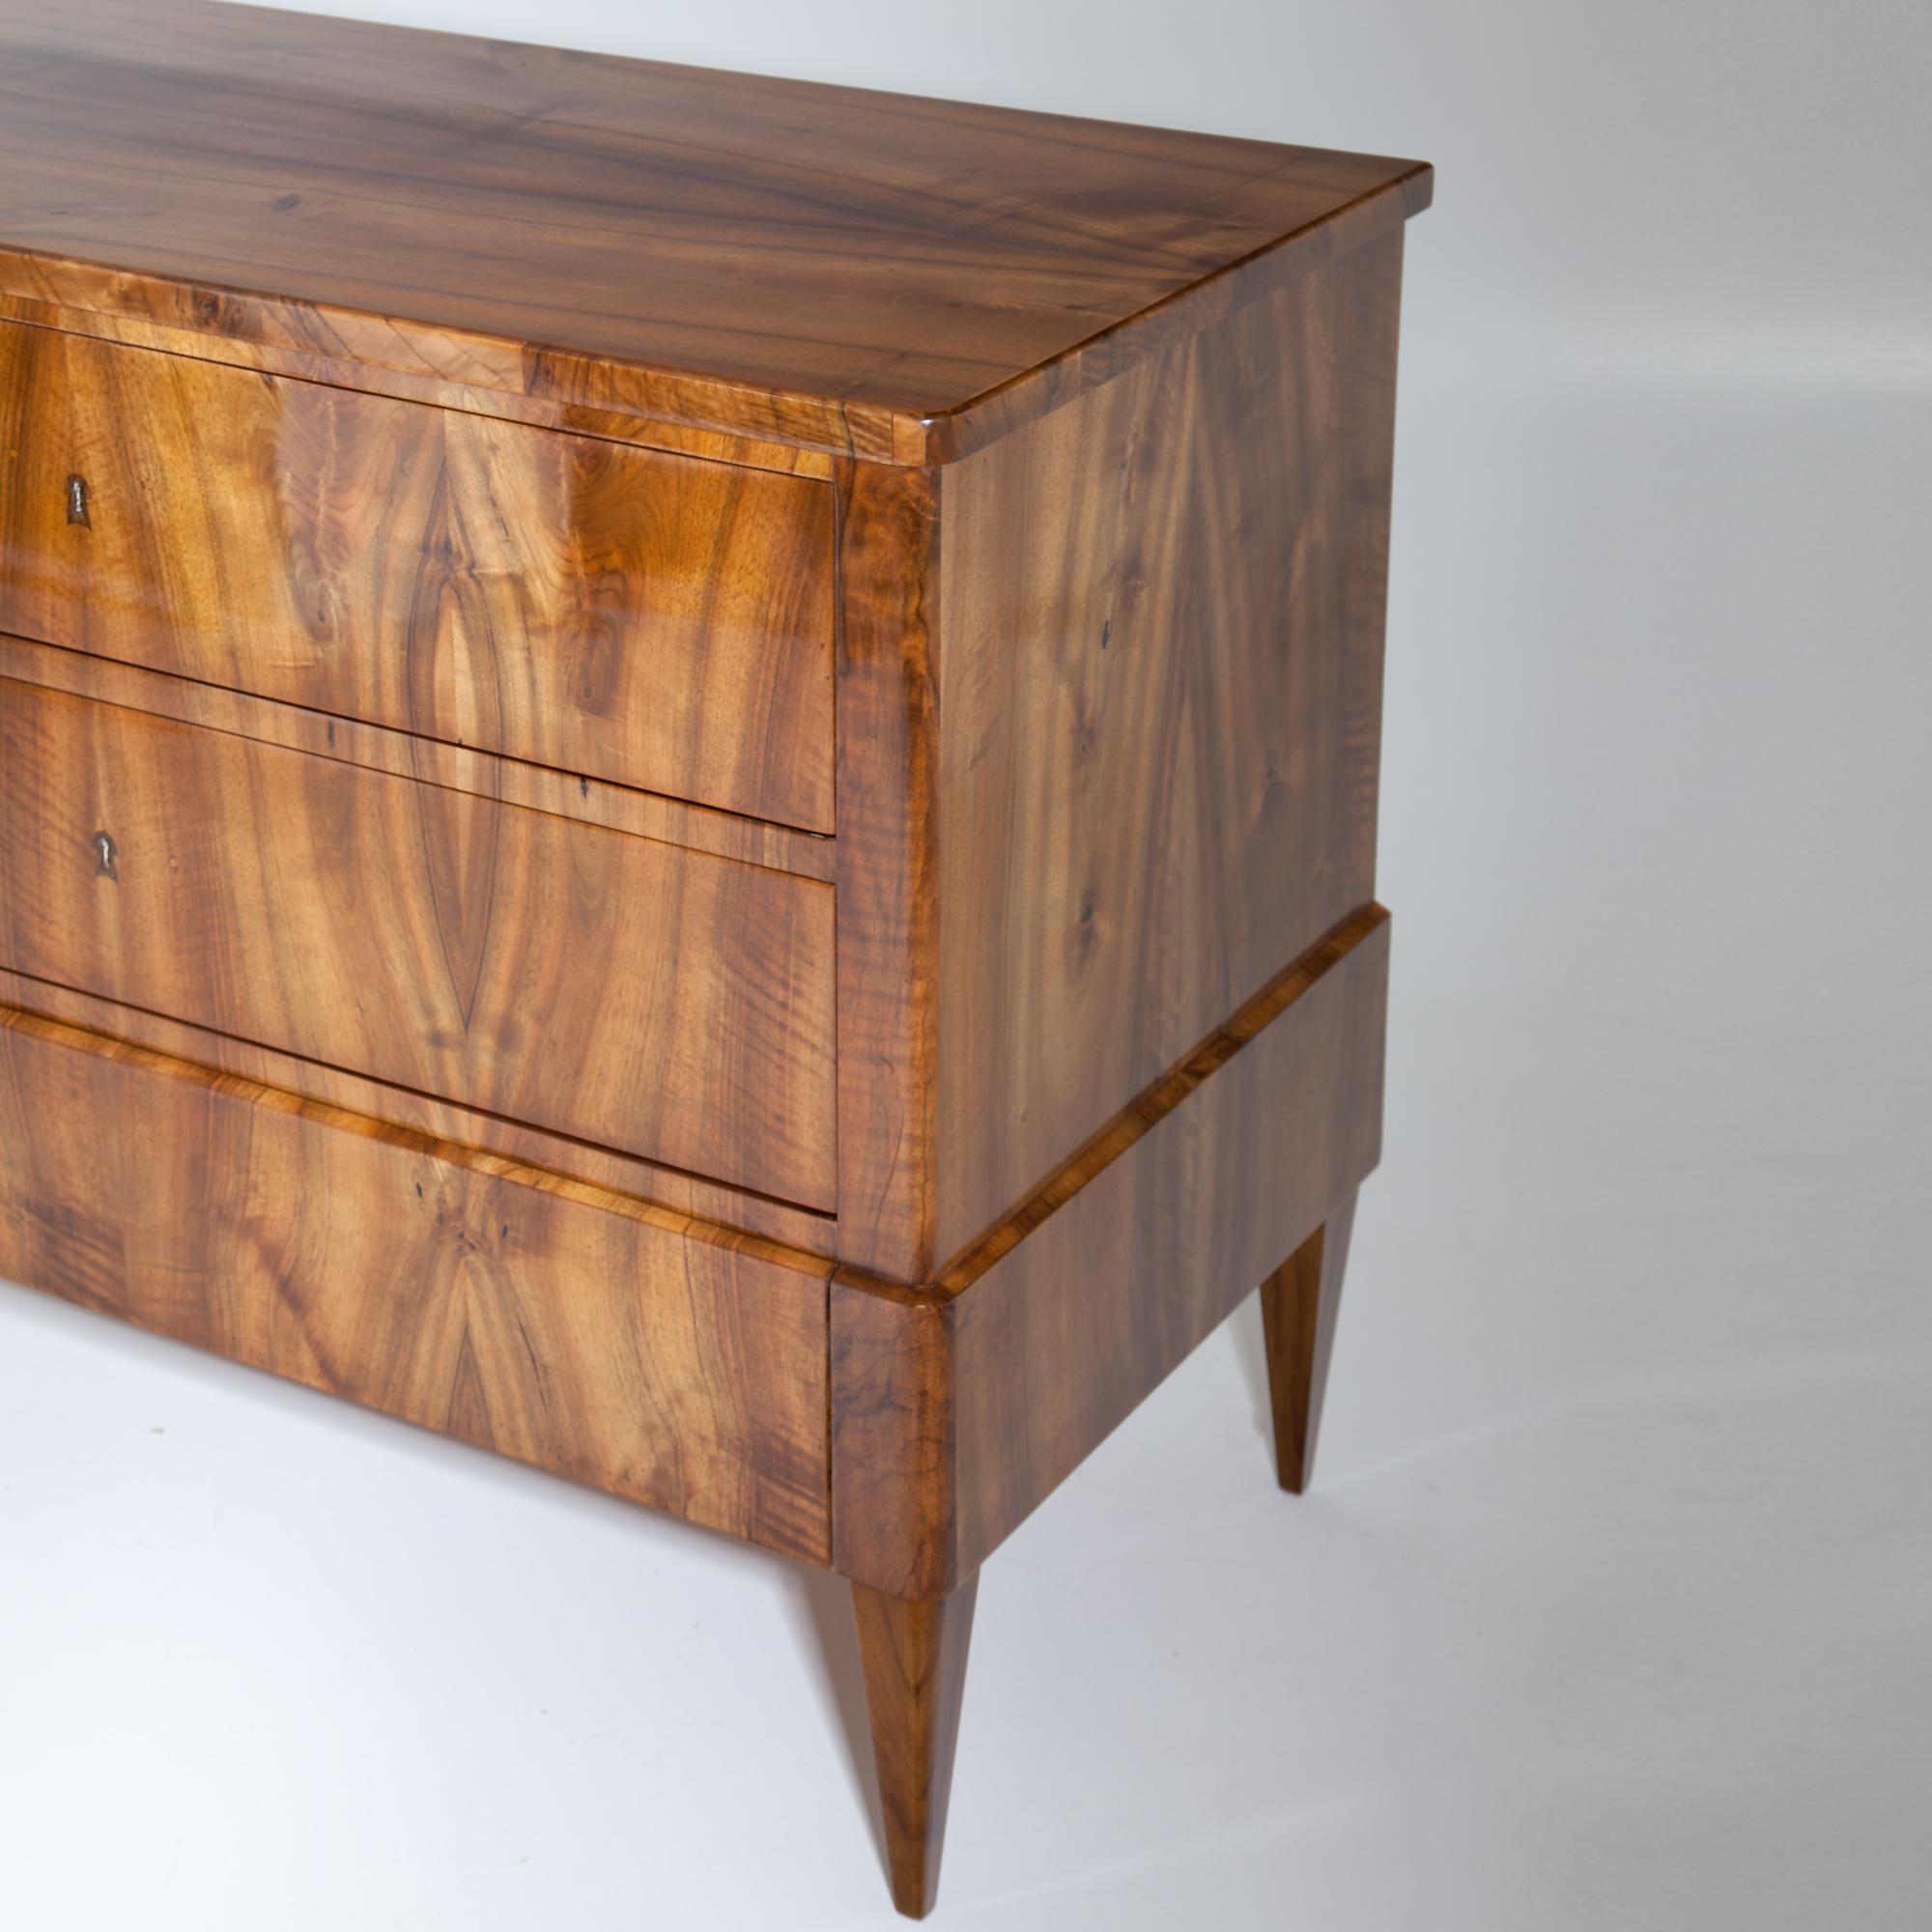 Biedermeier chest of drawers with three drawers on square pointed feet. The lowest drawer blends into the slightly accentuated all-round rail. Very nice walnut veneer. Restored condition, legs replaced.